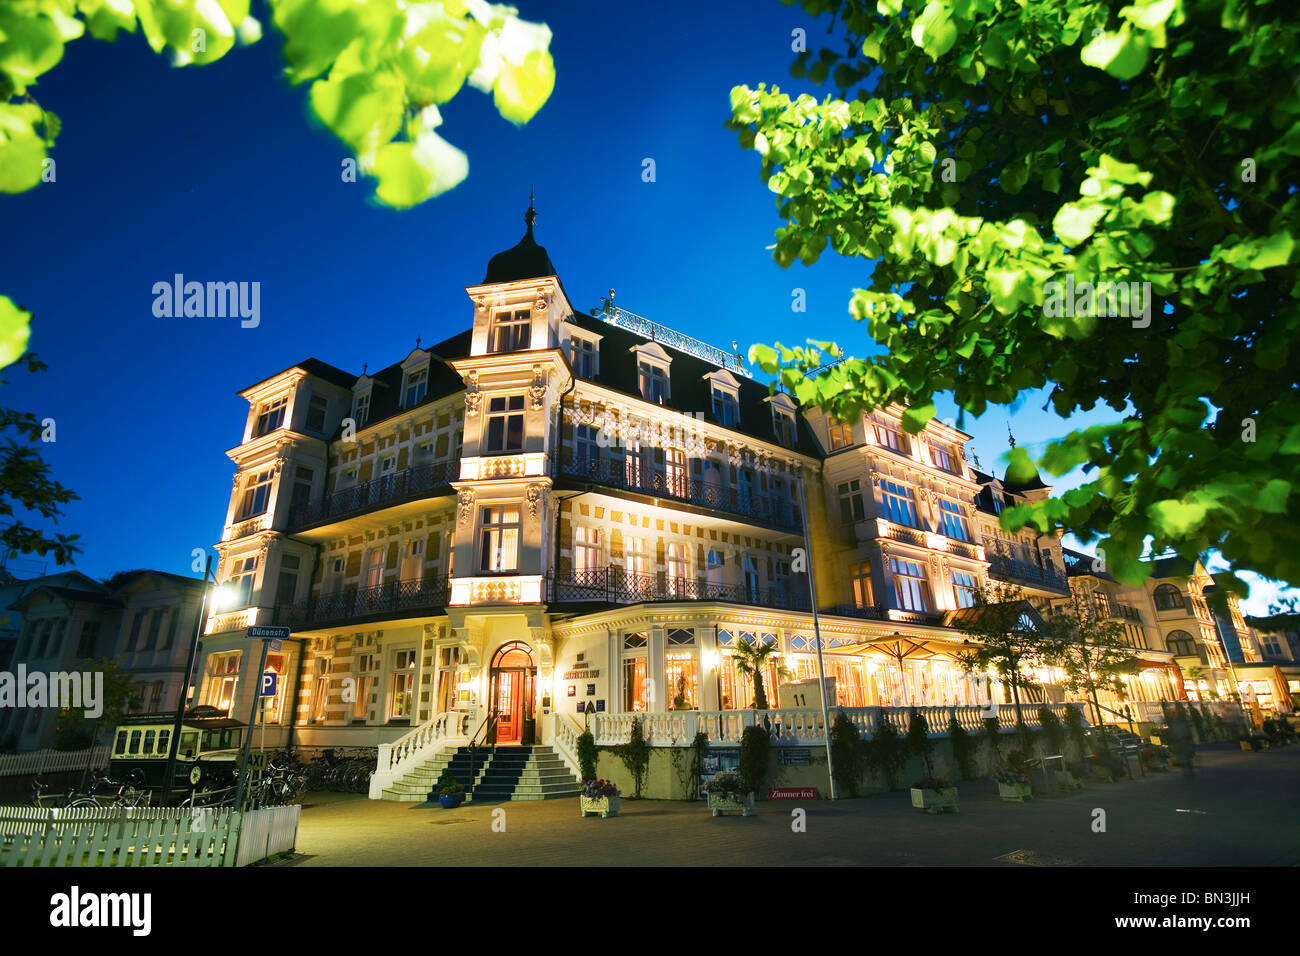 Hotel Ahlbecker Hof at night, Ahlbeck, Usedom, Germany, low angle view Stock Photo